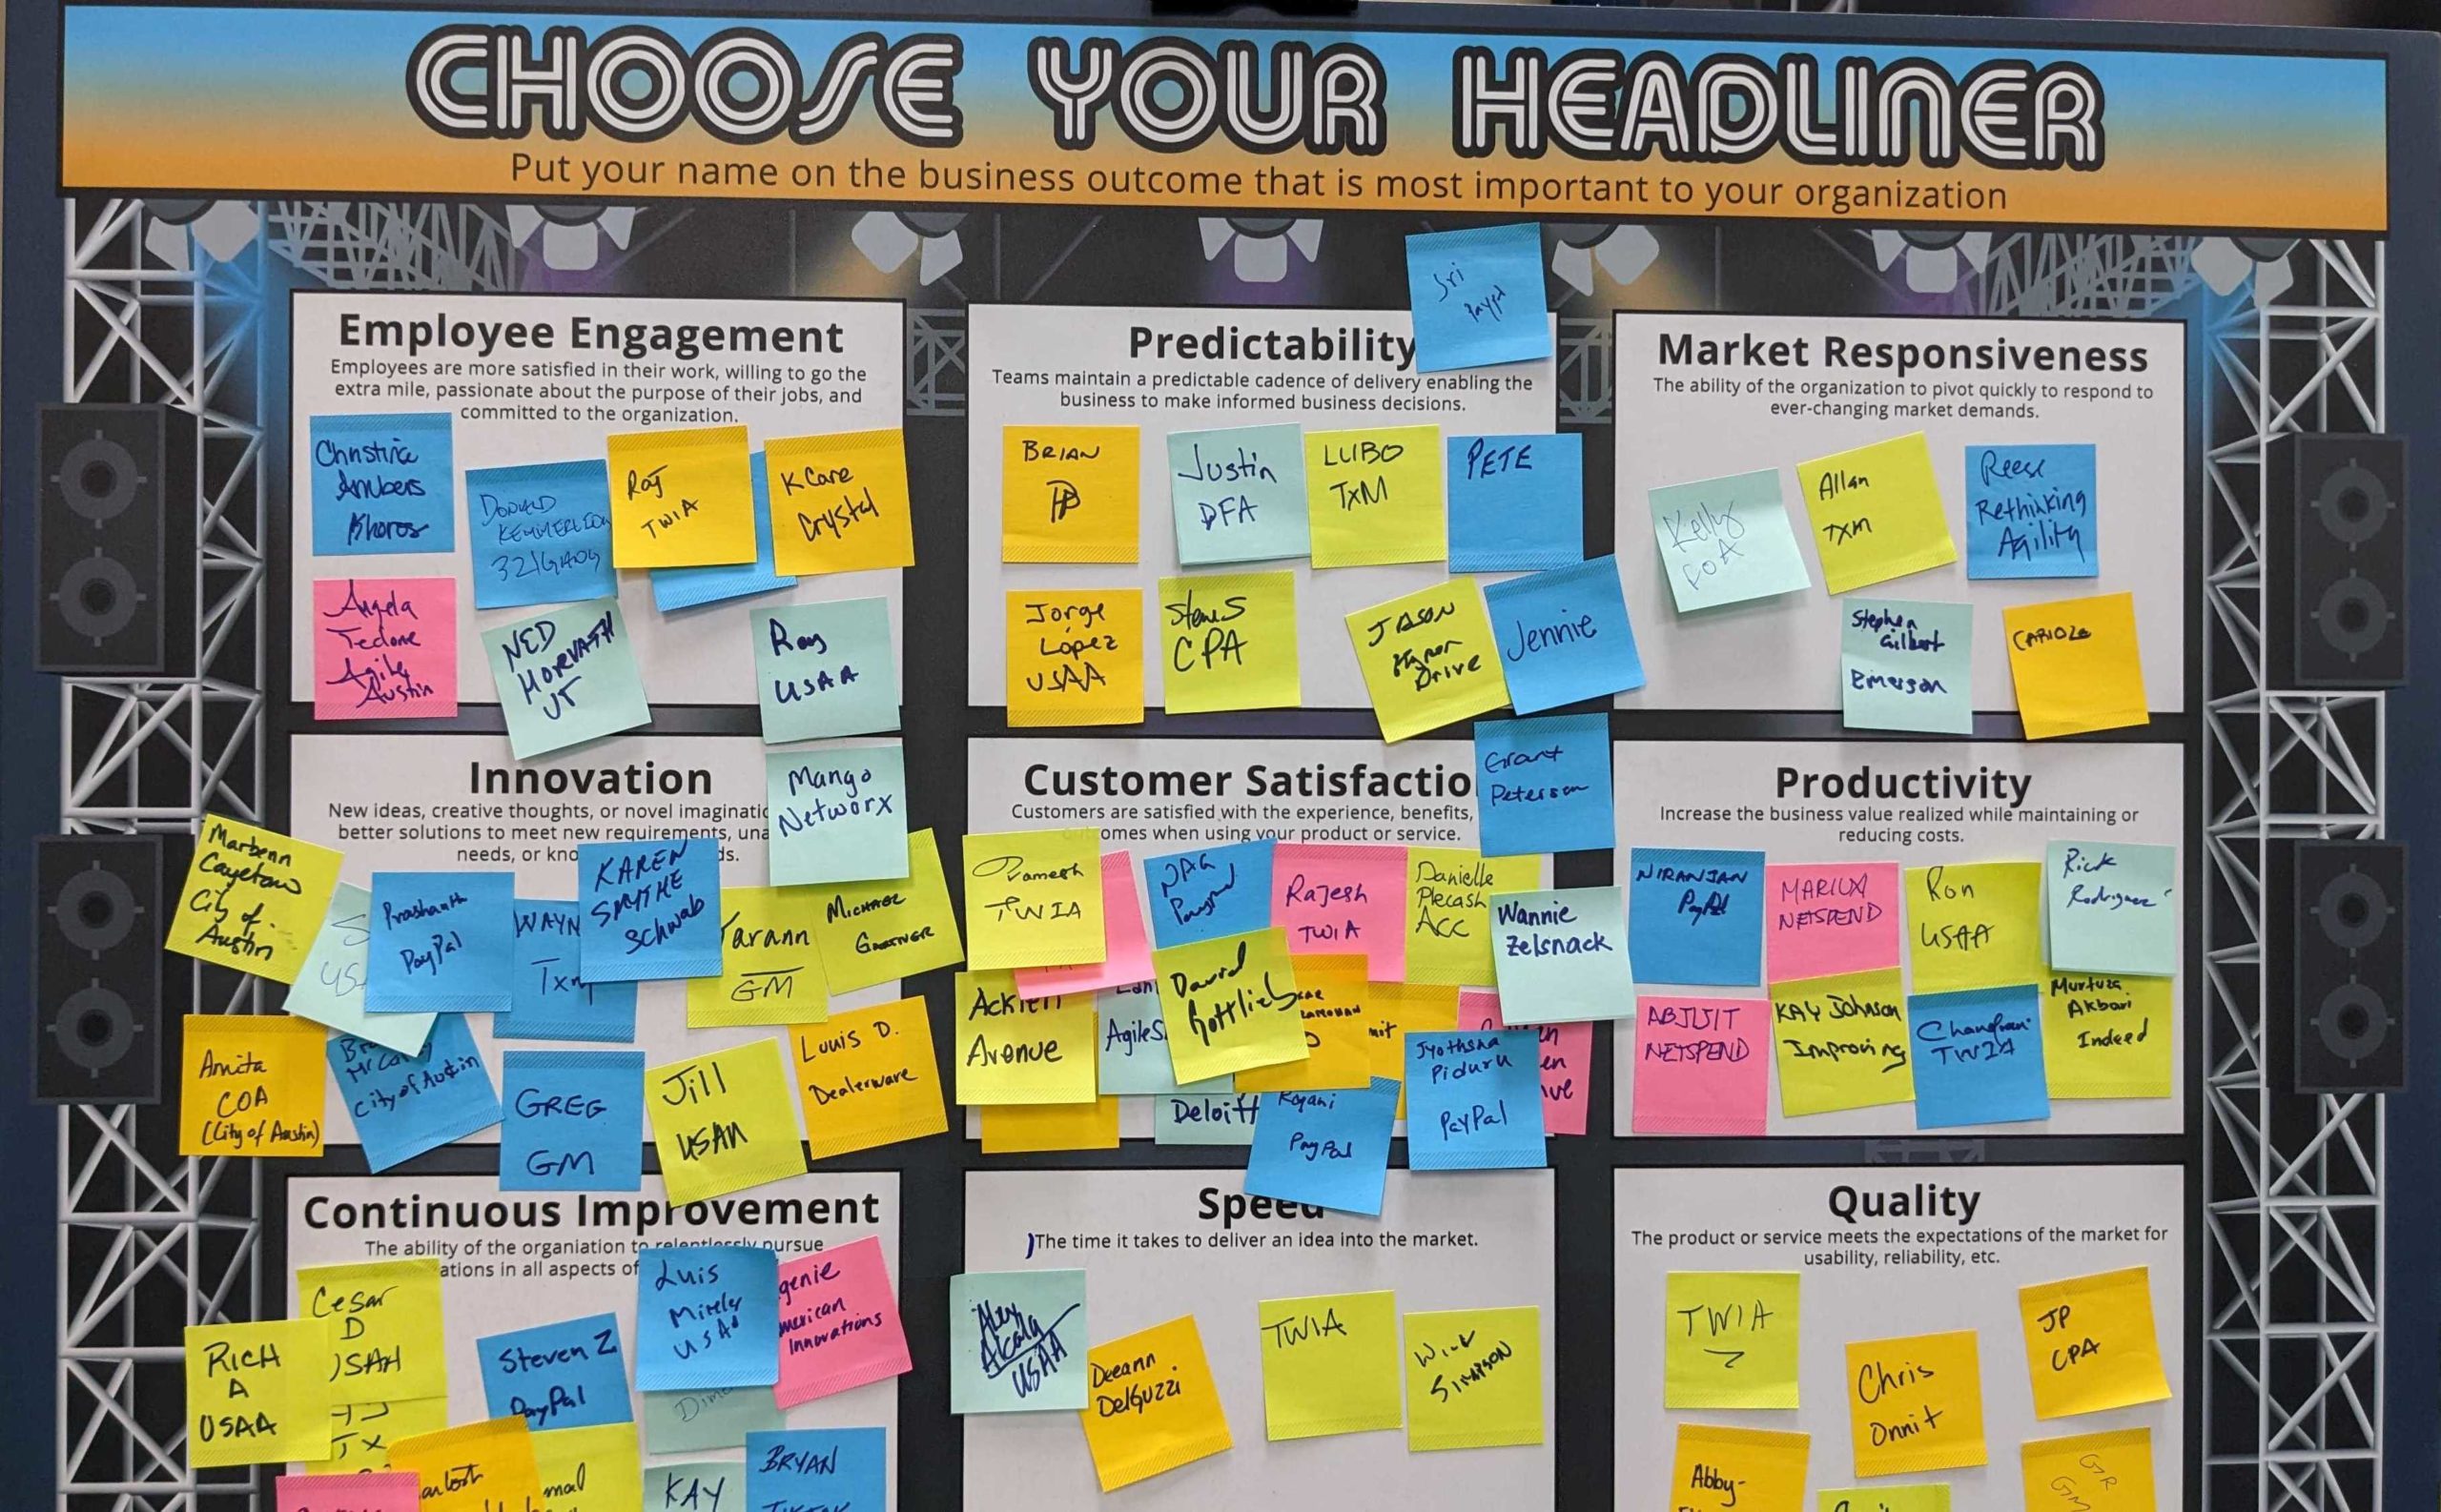 An image of our business outcomes activity at Keep Austin Agile.